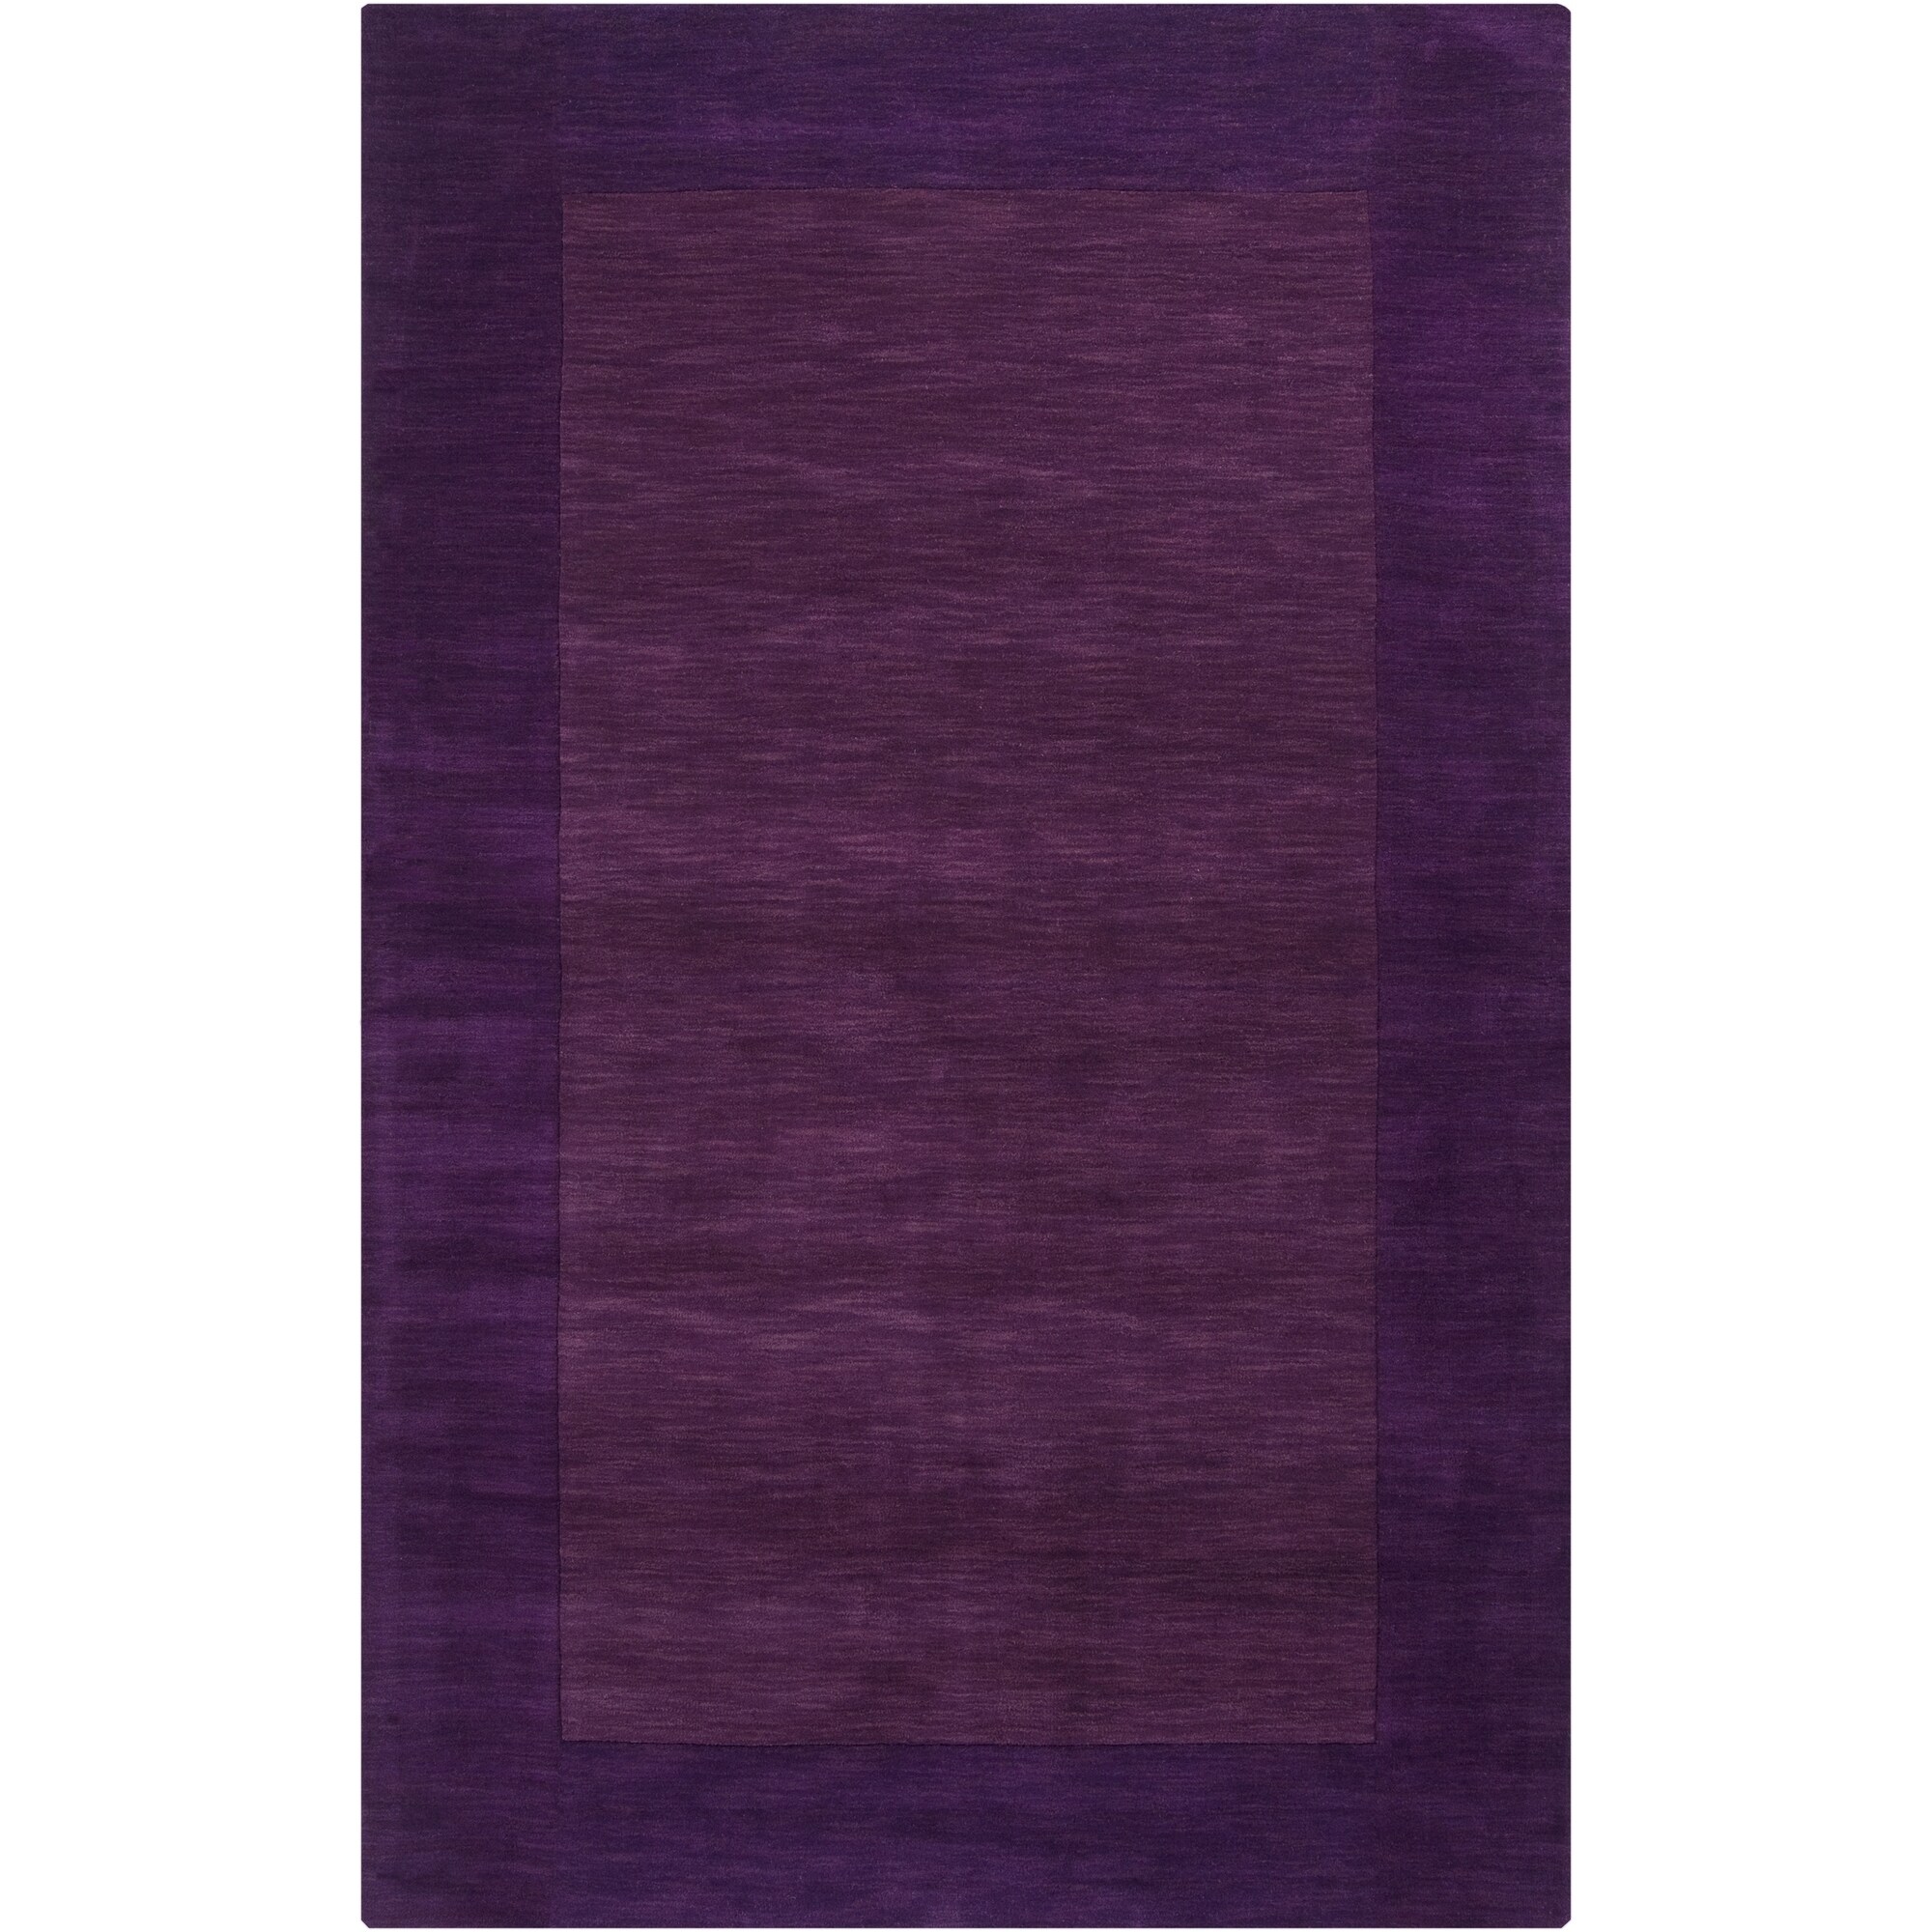 Buy Purple 6 X 9 Area Rugs Online At Overstockcom Our Best